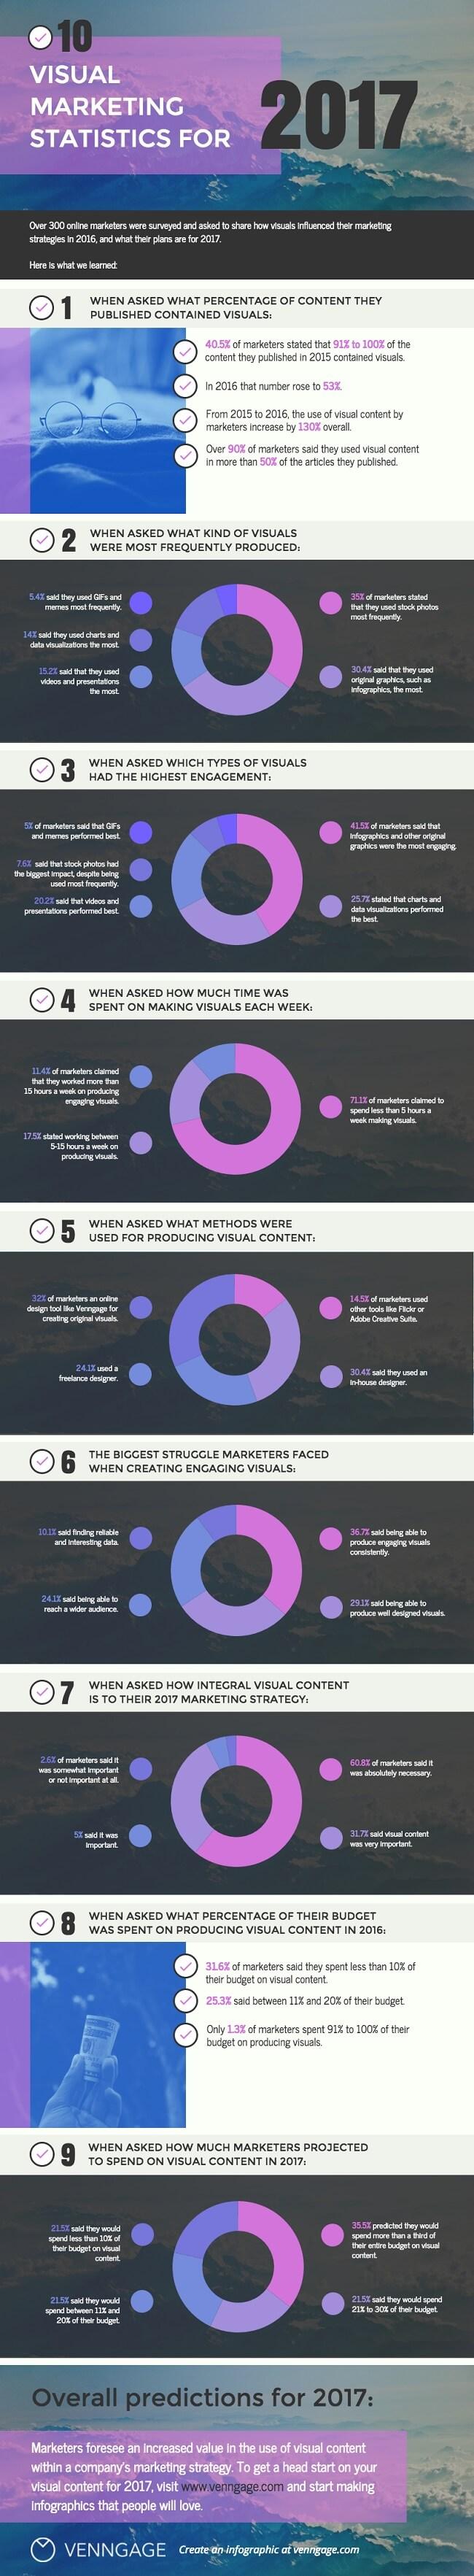 Visual marketing stats infographic from Unmetric